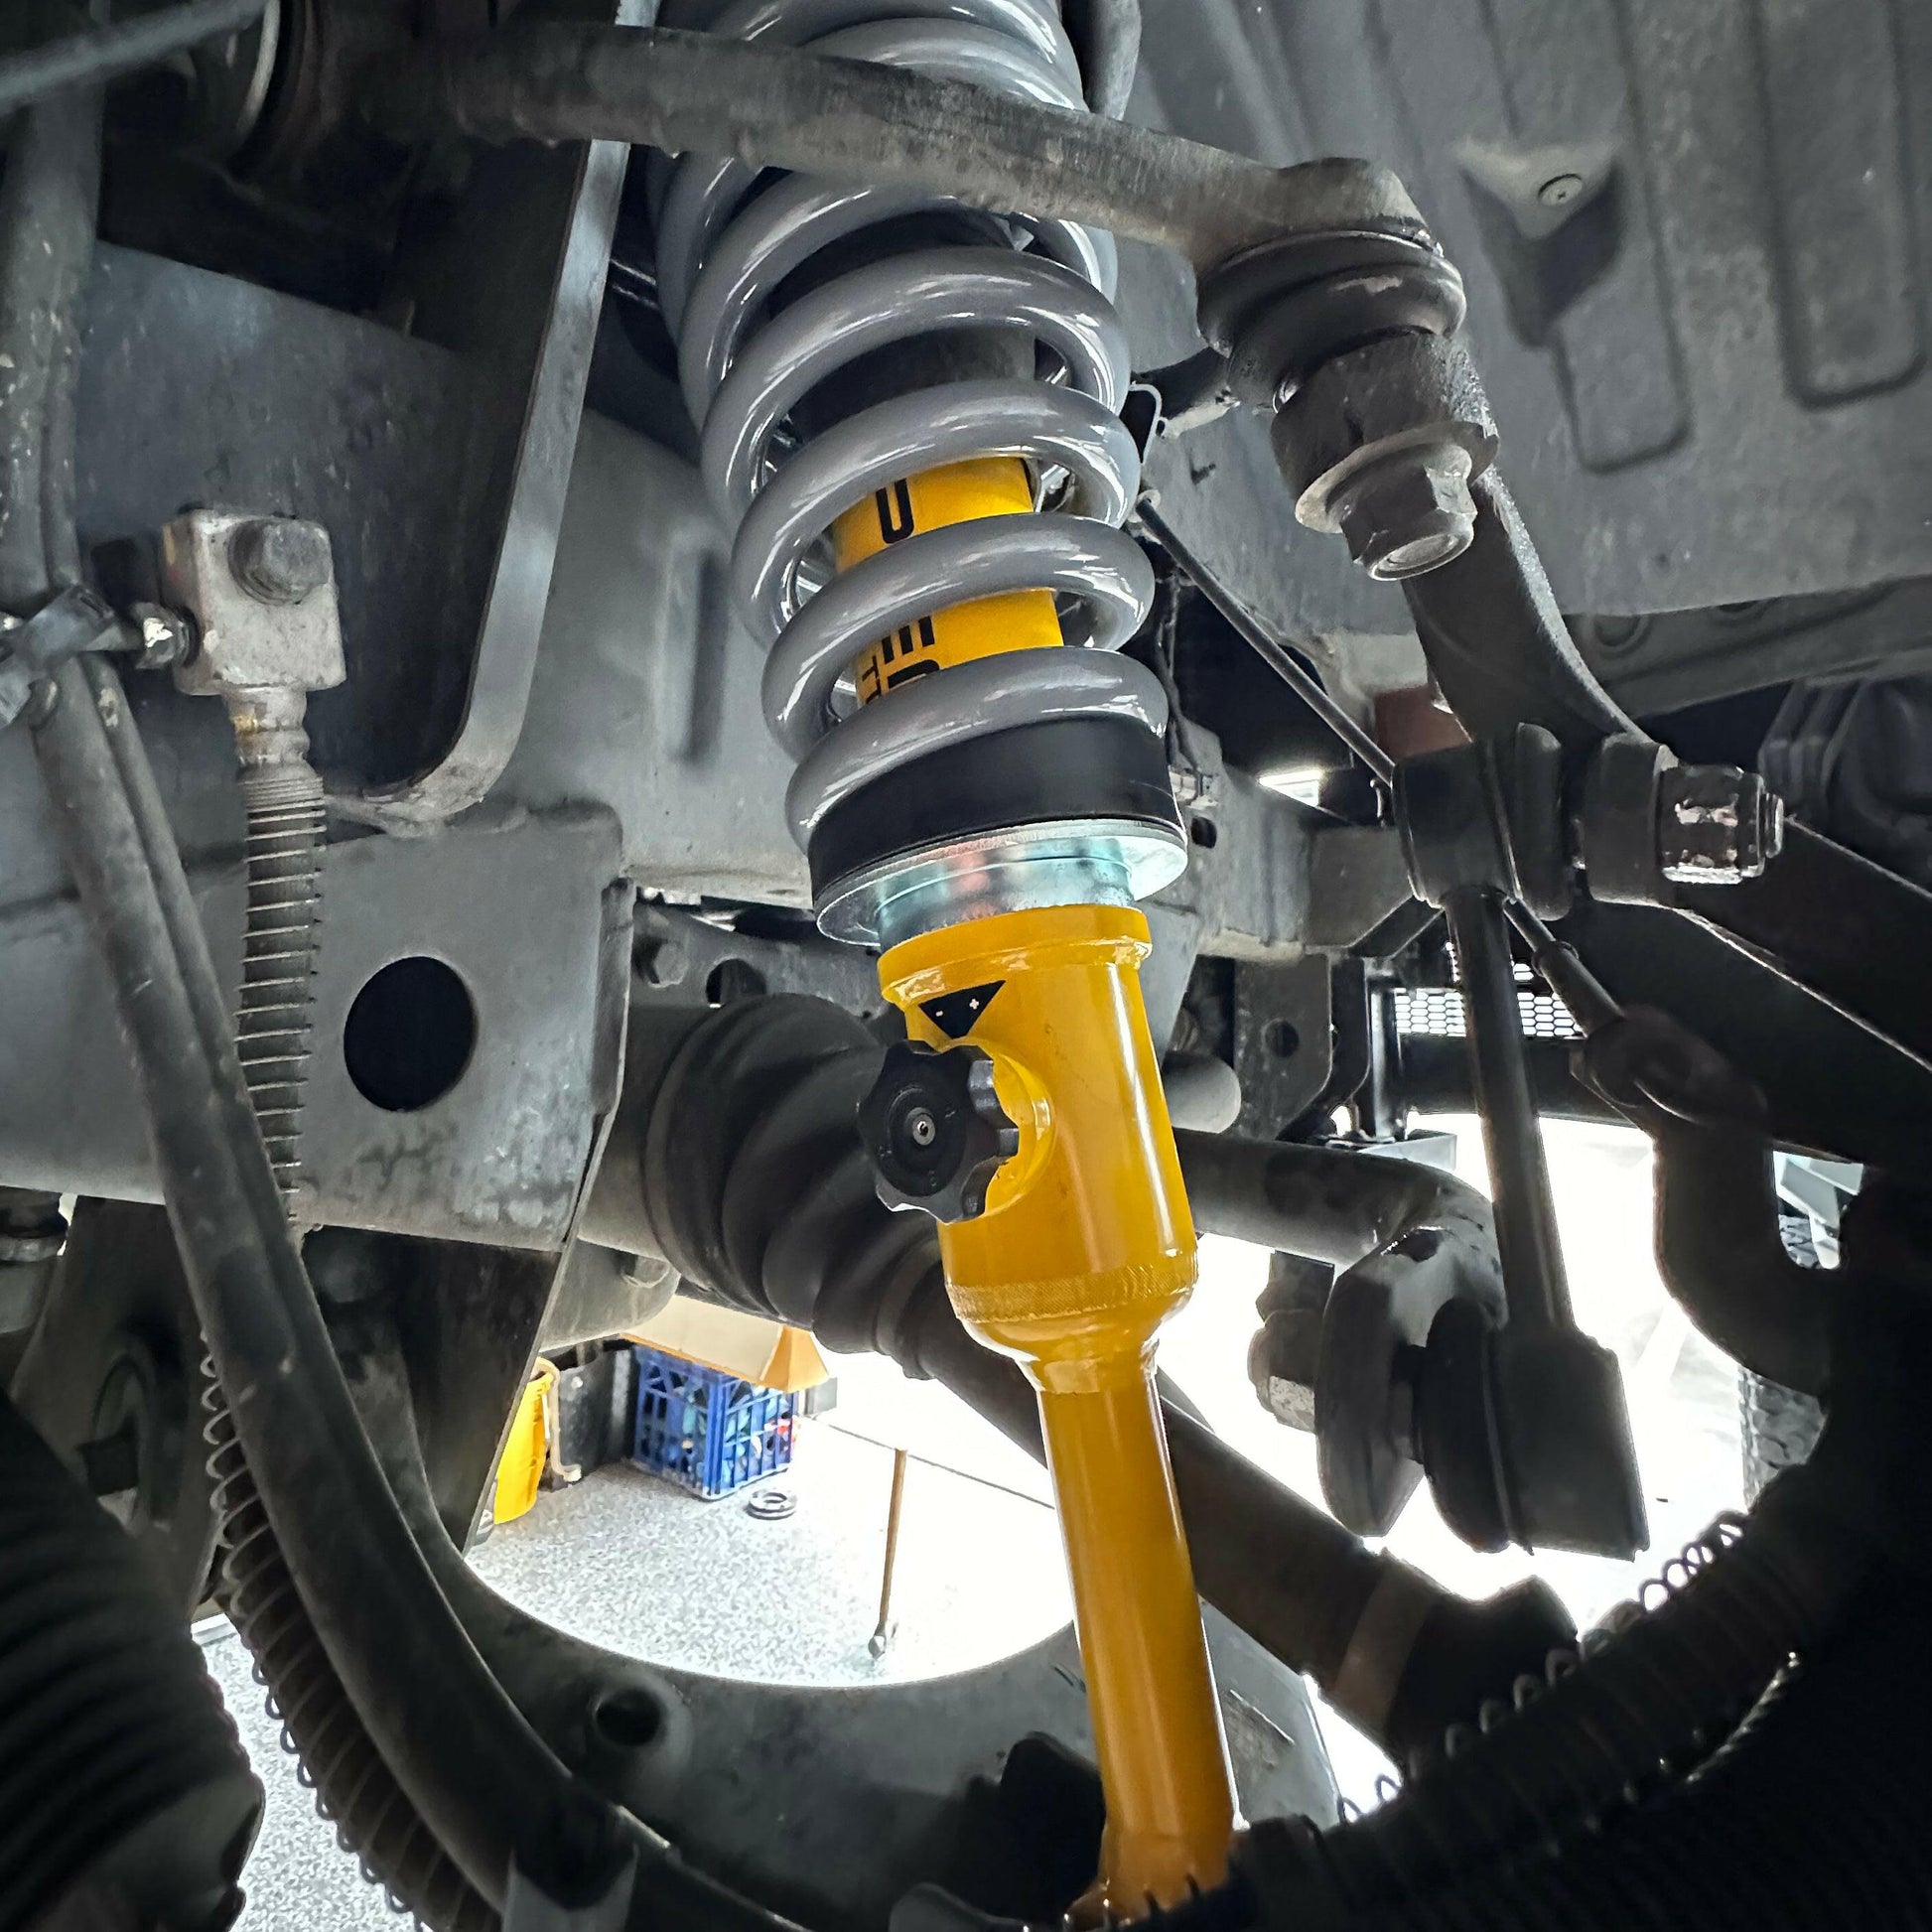 PEAK 2 Inch Shock & Suspension Combo for SsangYong Musso.